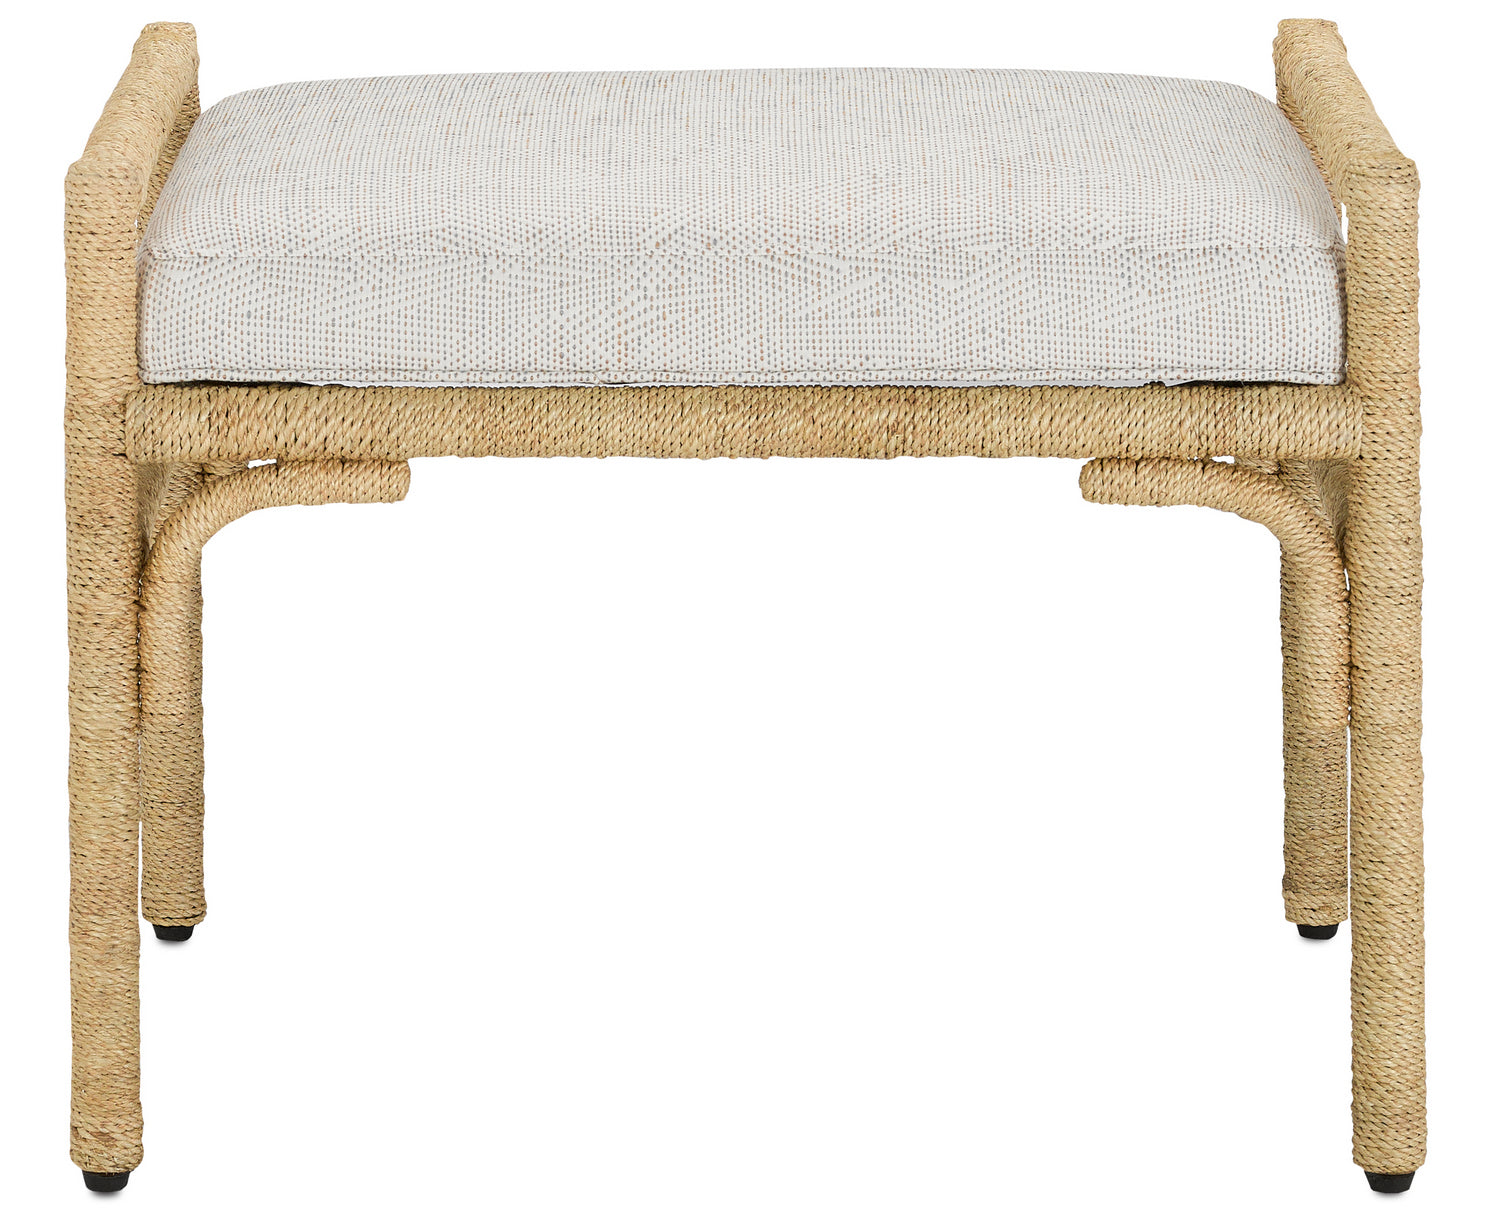 Ottoman from the Olisa collection in Natural finish